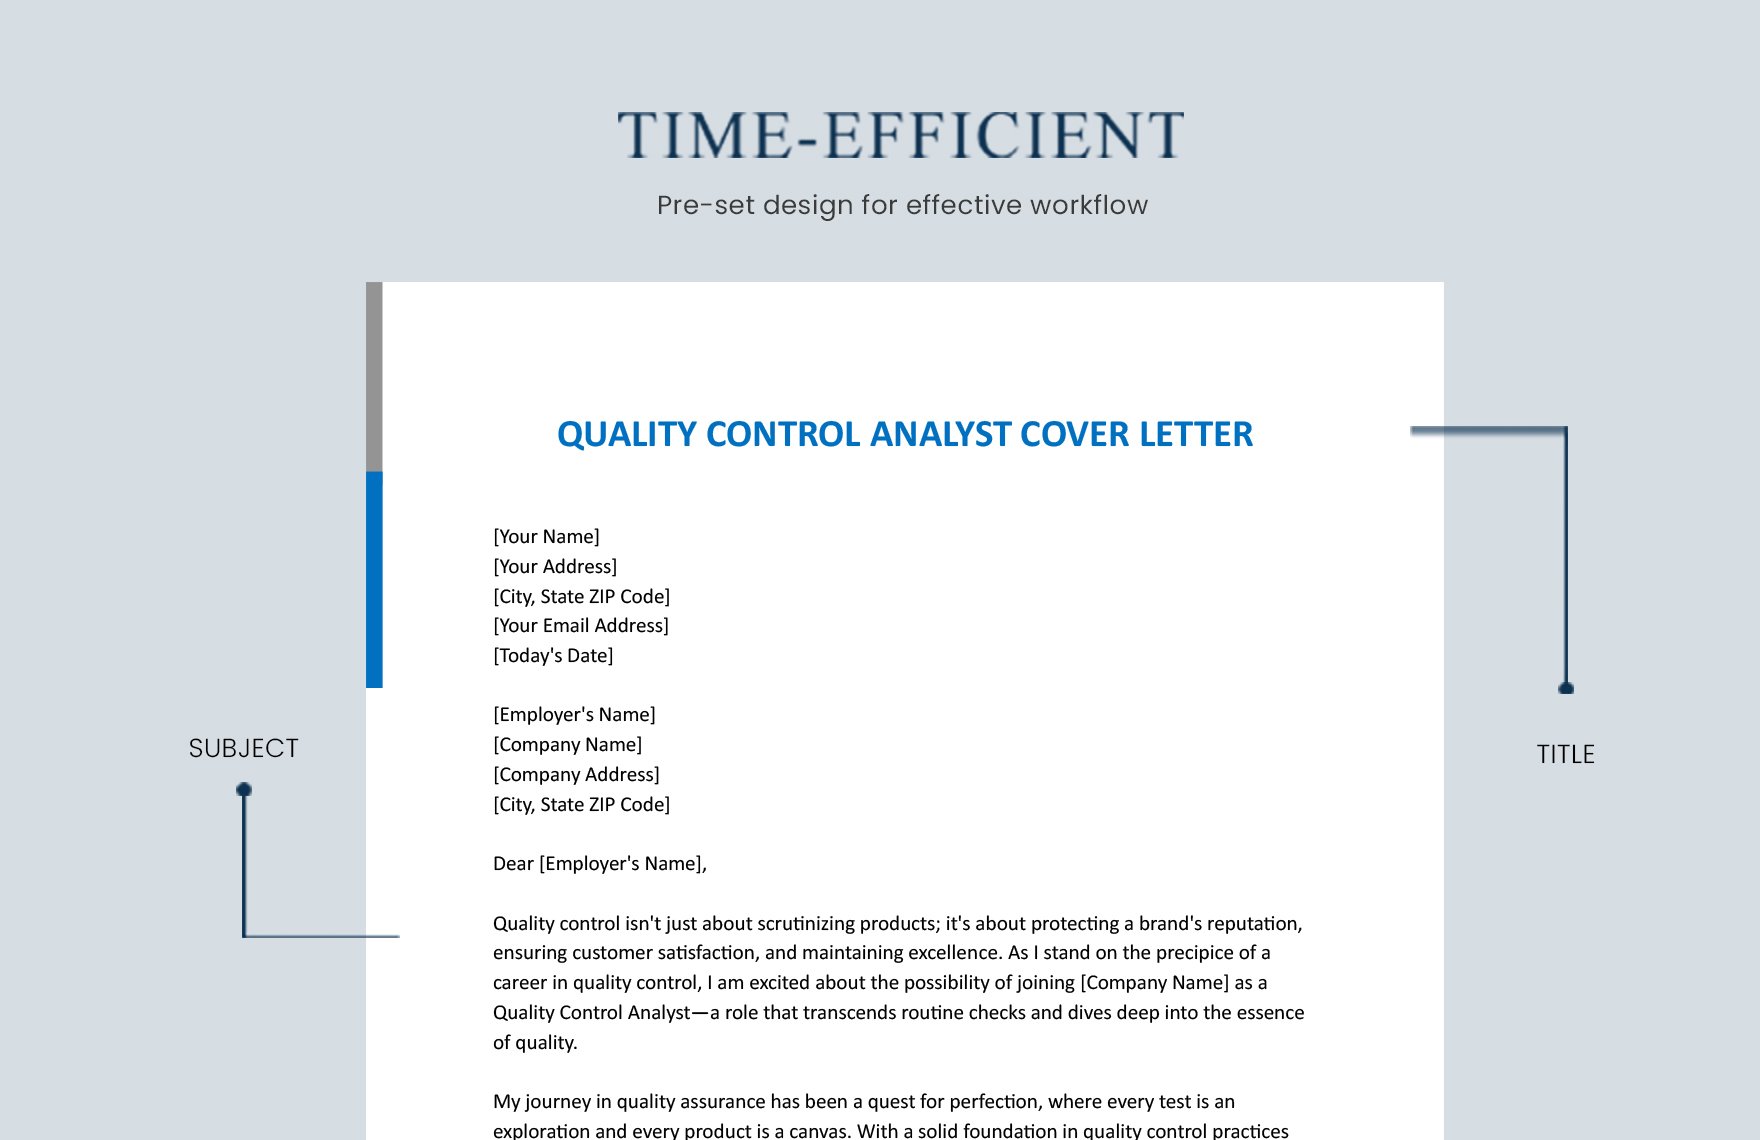 Quality Control Analyst Cover Letter